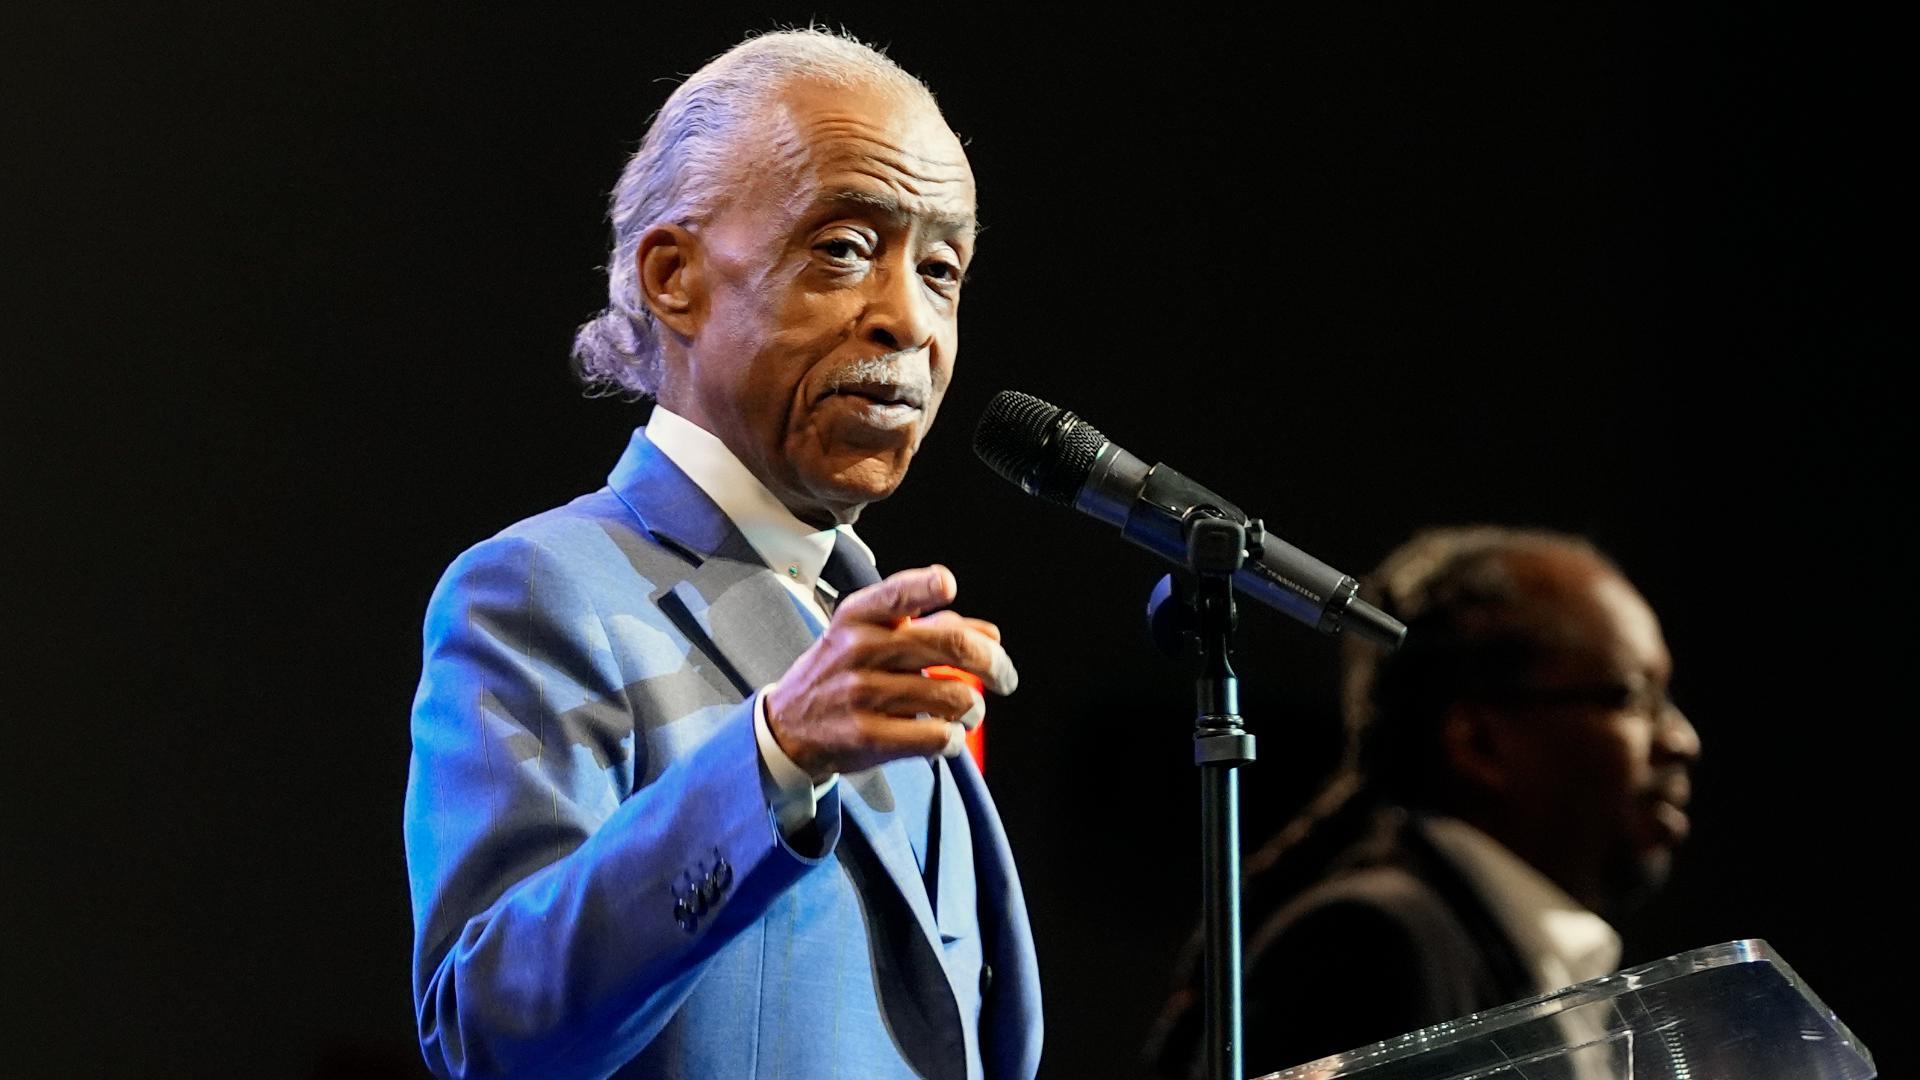 The attorneys for Frank E. Tyson's family say Rev. Al Sharpton will deliver the eulogy next week amid calls for justice after his death in Canton police custody.